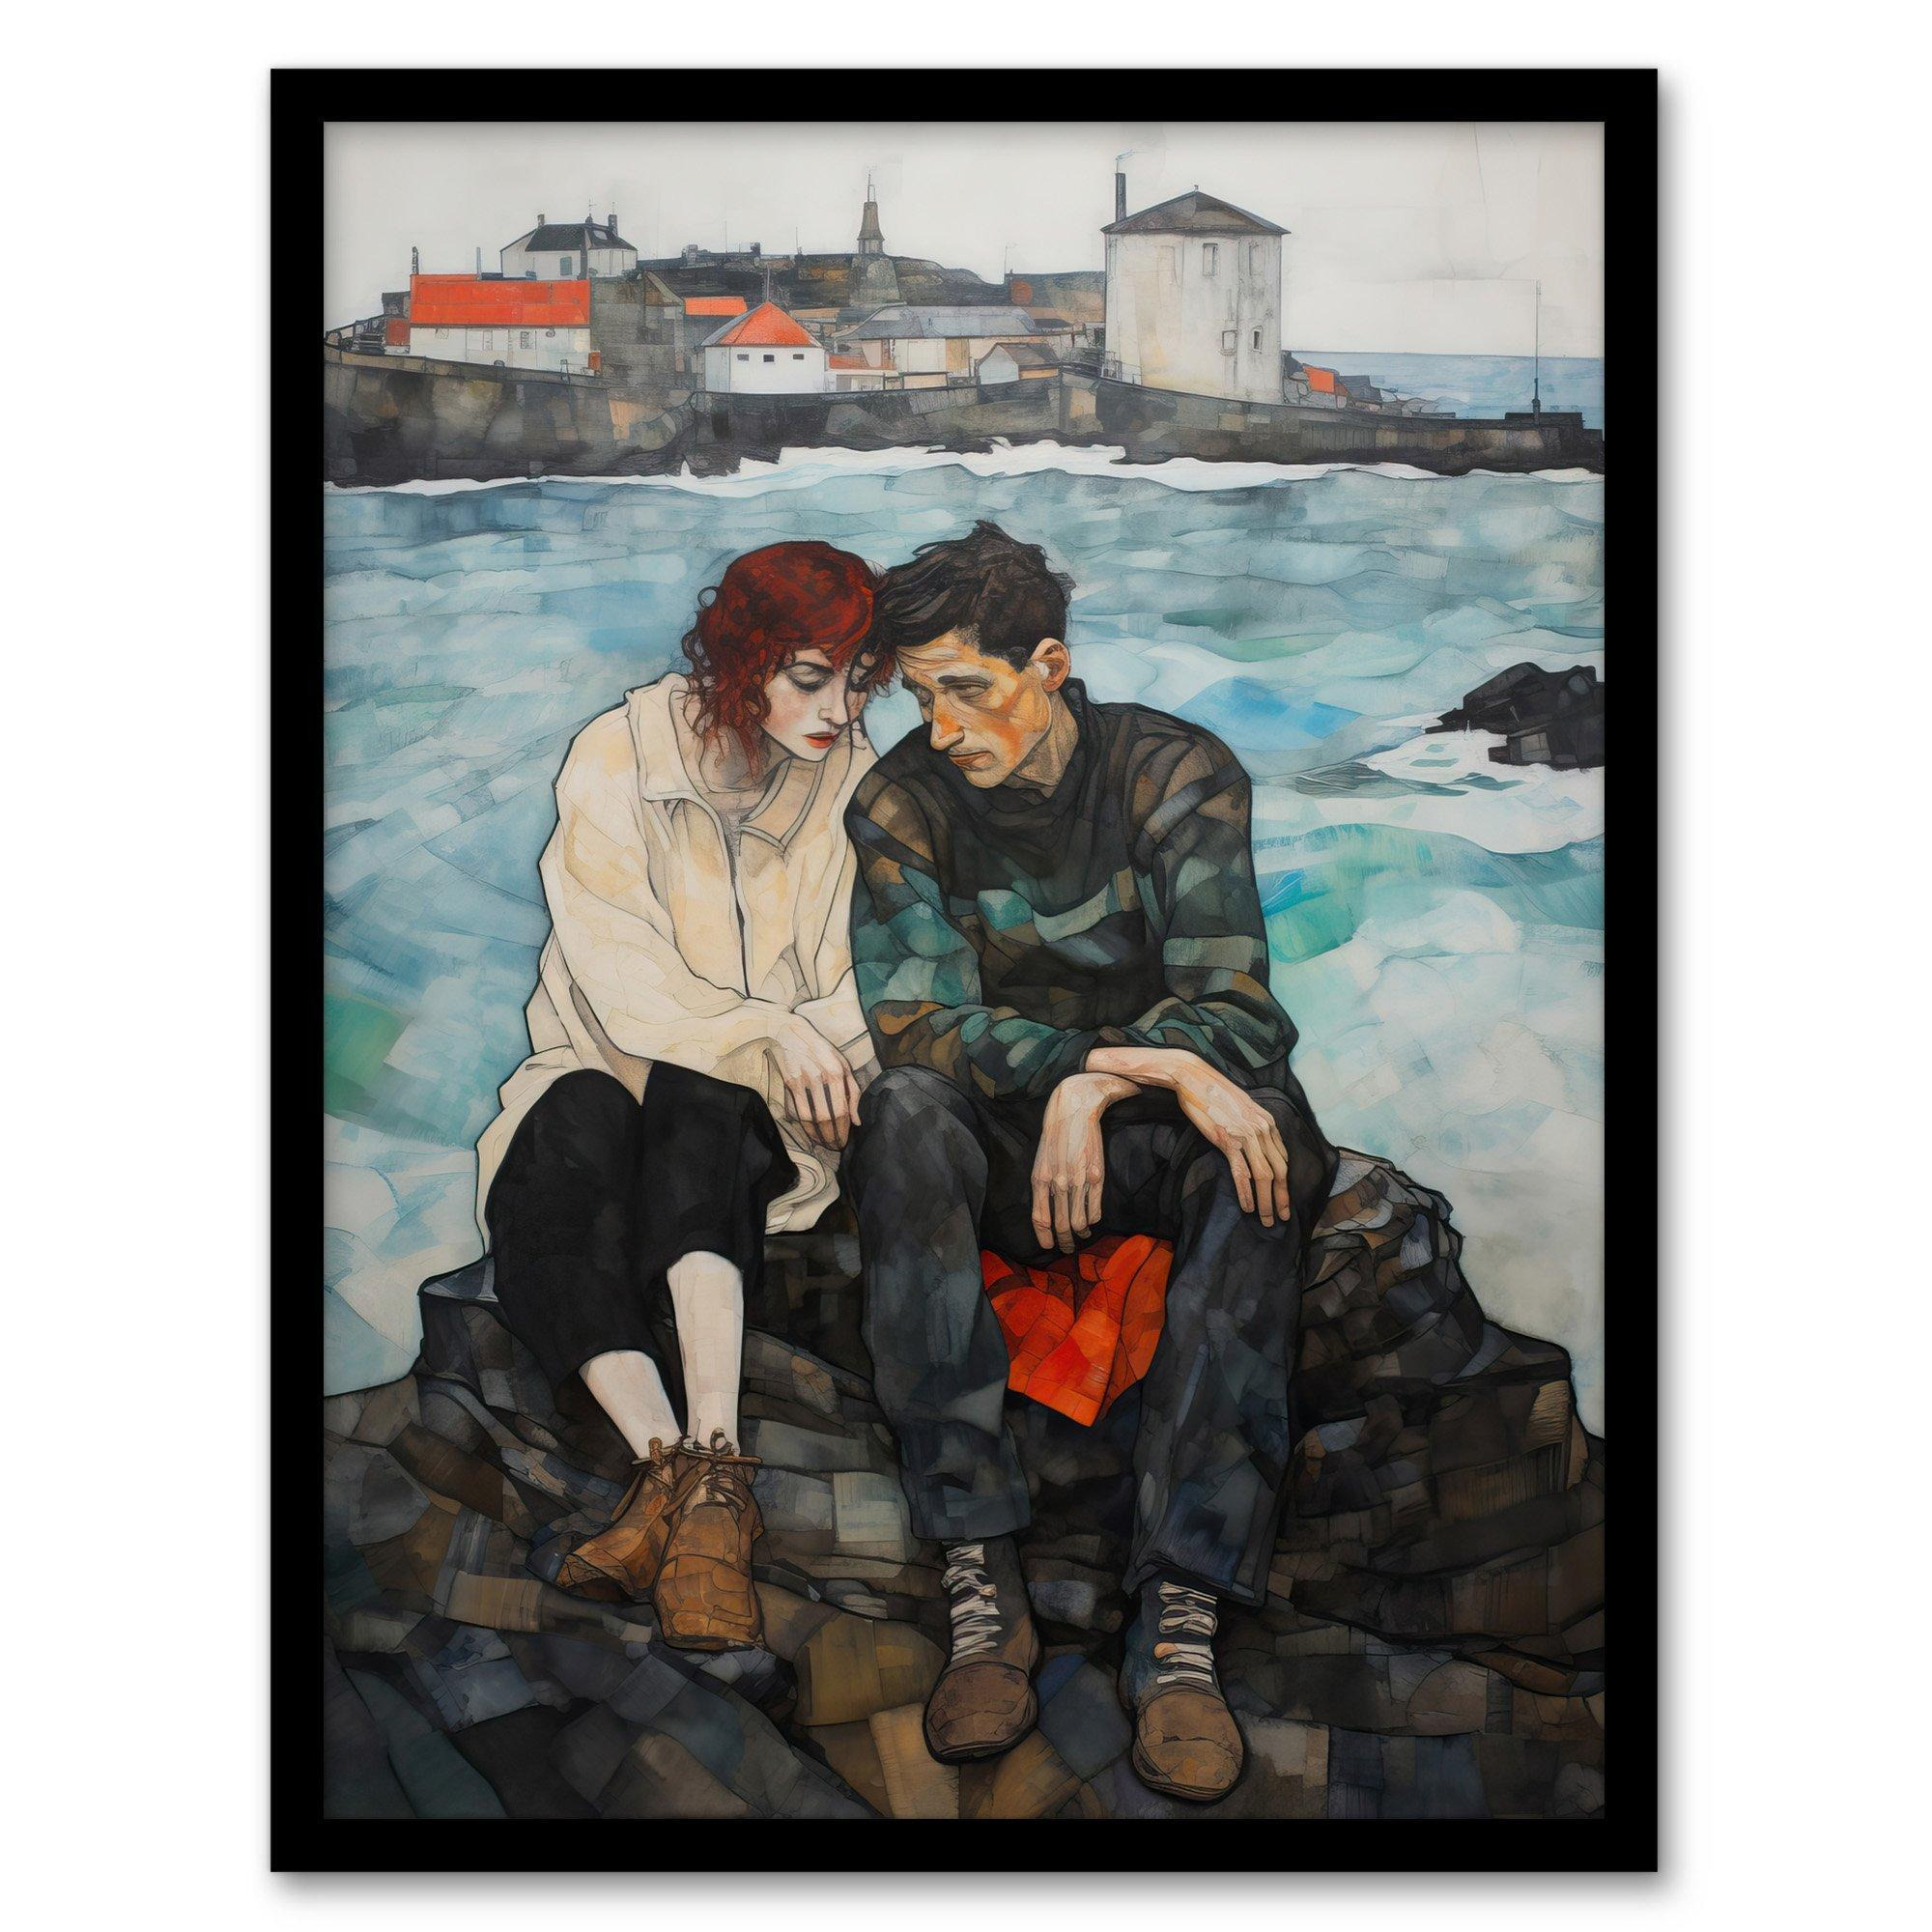 The Heart To Heart Egon Schiele Style Couple Sitting in Coastal Landscape Blue Grey Red Oil Painting Art Print Framed Poster Wall Decor - image 1